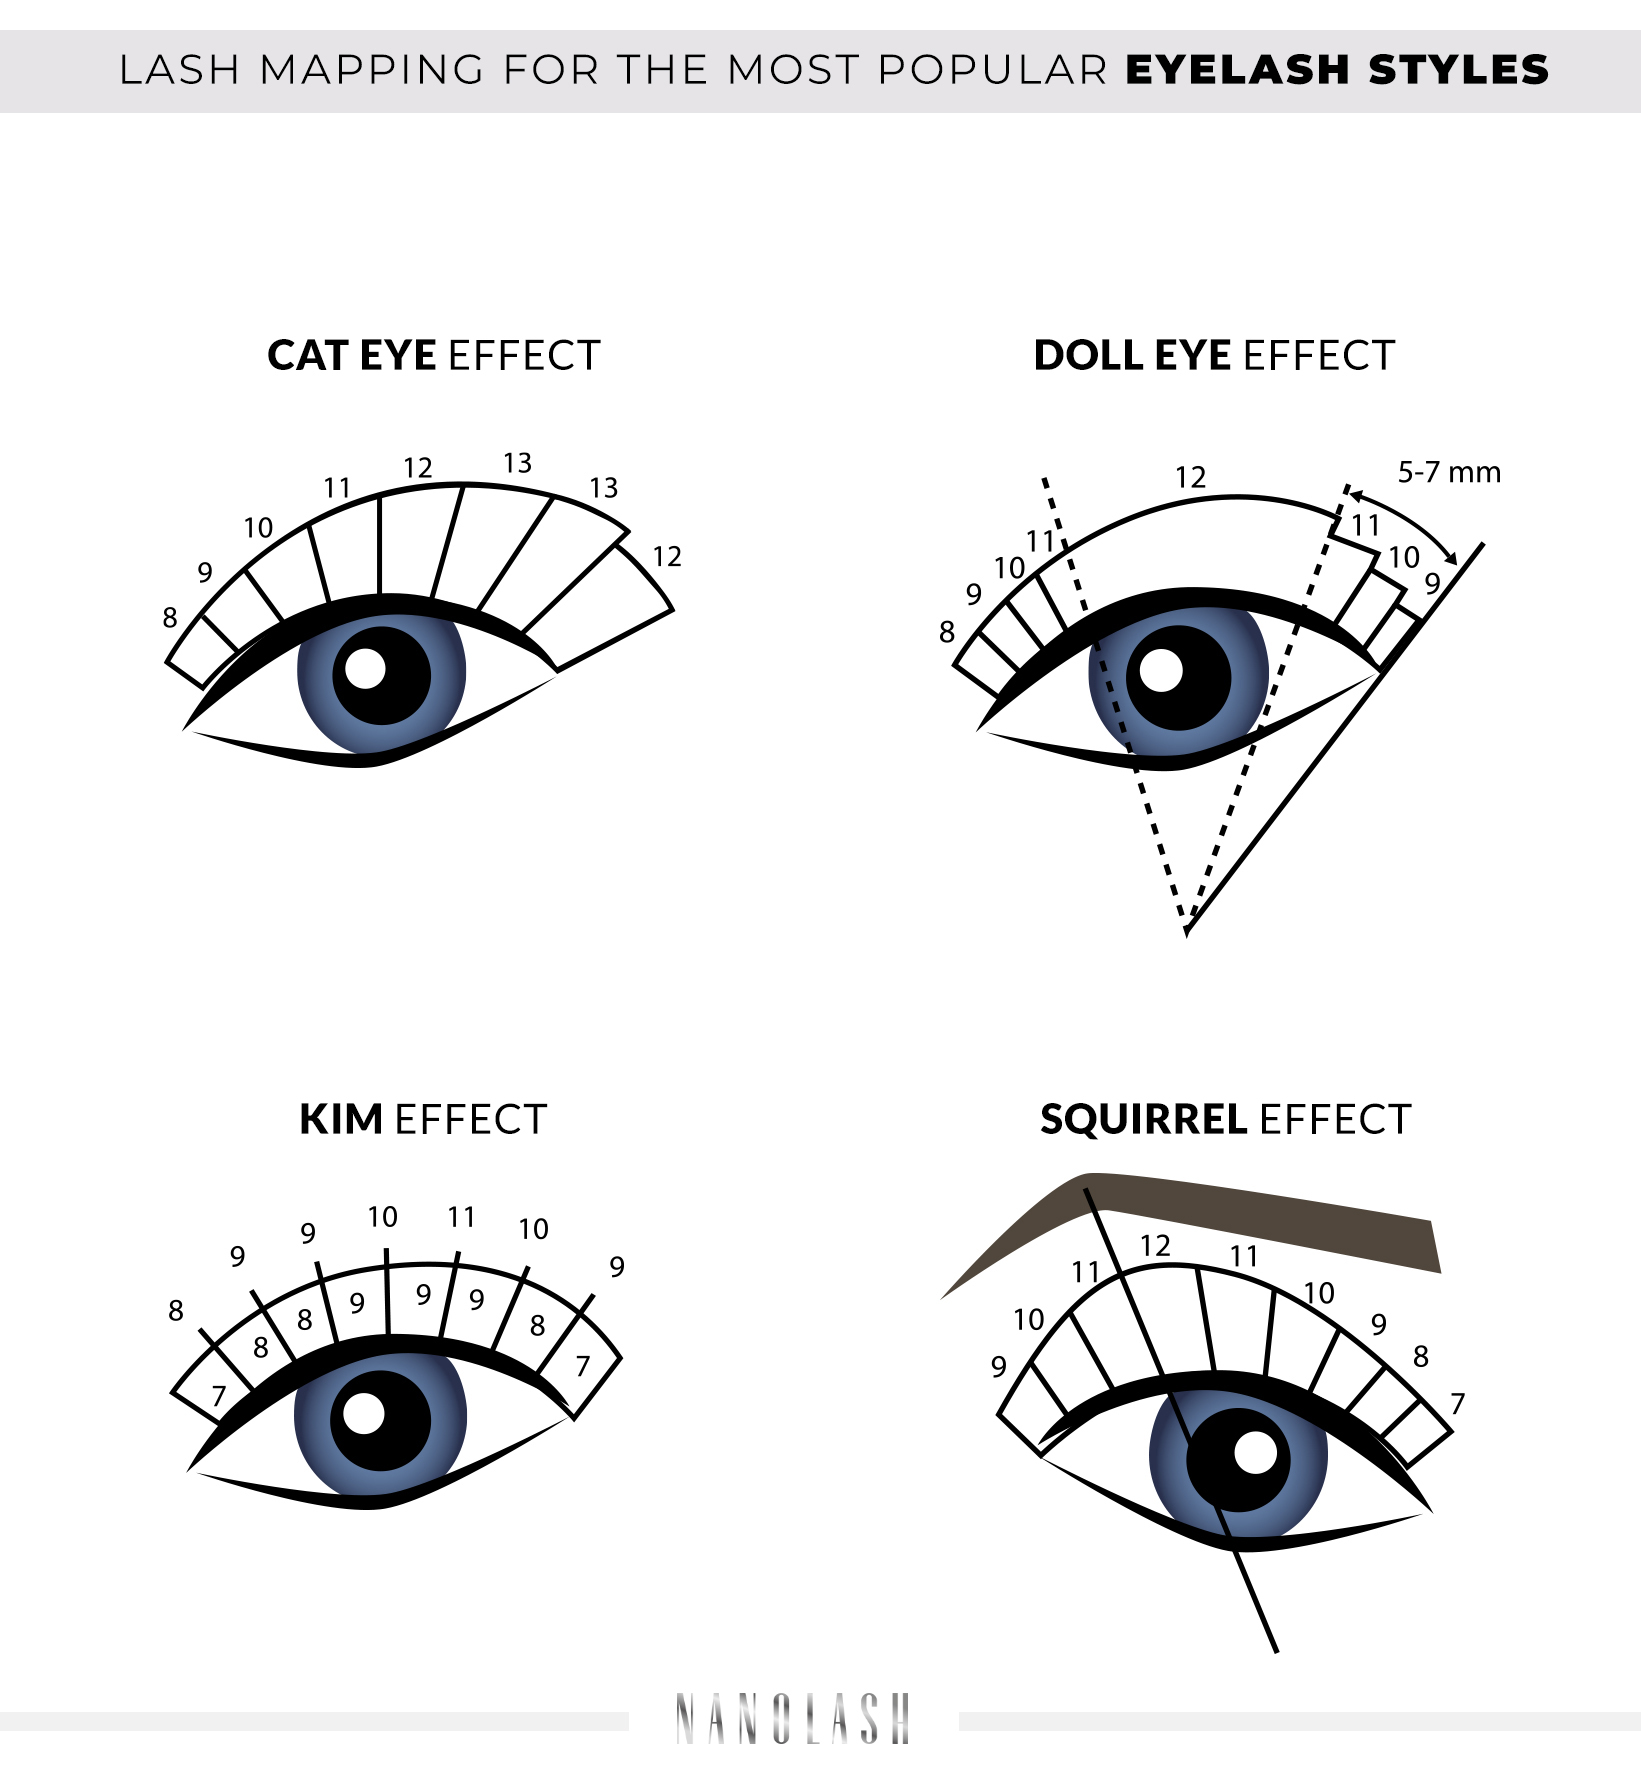 How to perform eyelash mapping?